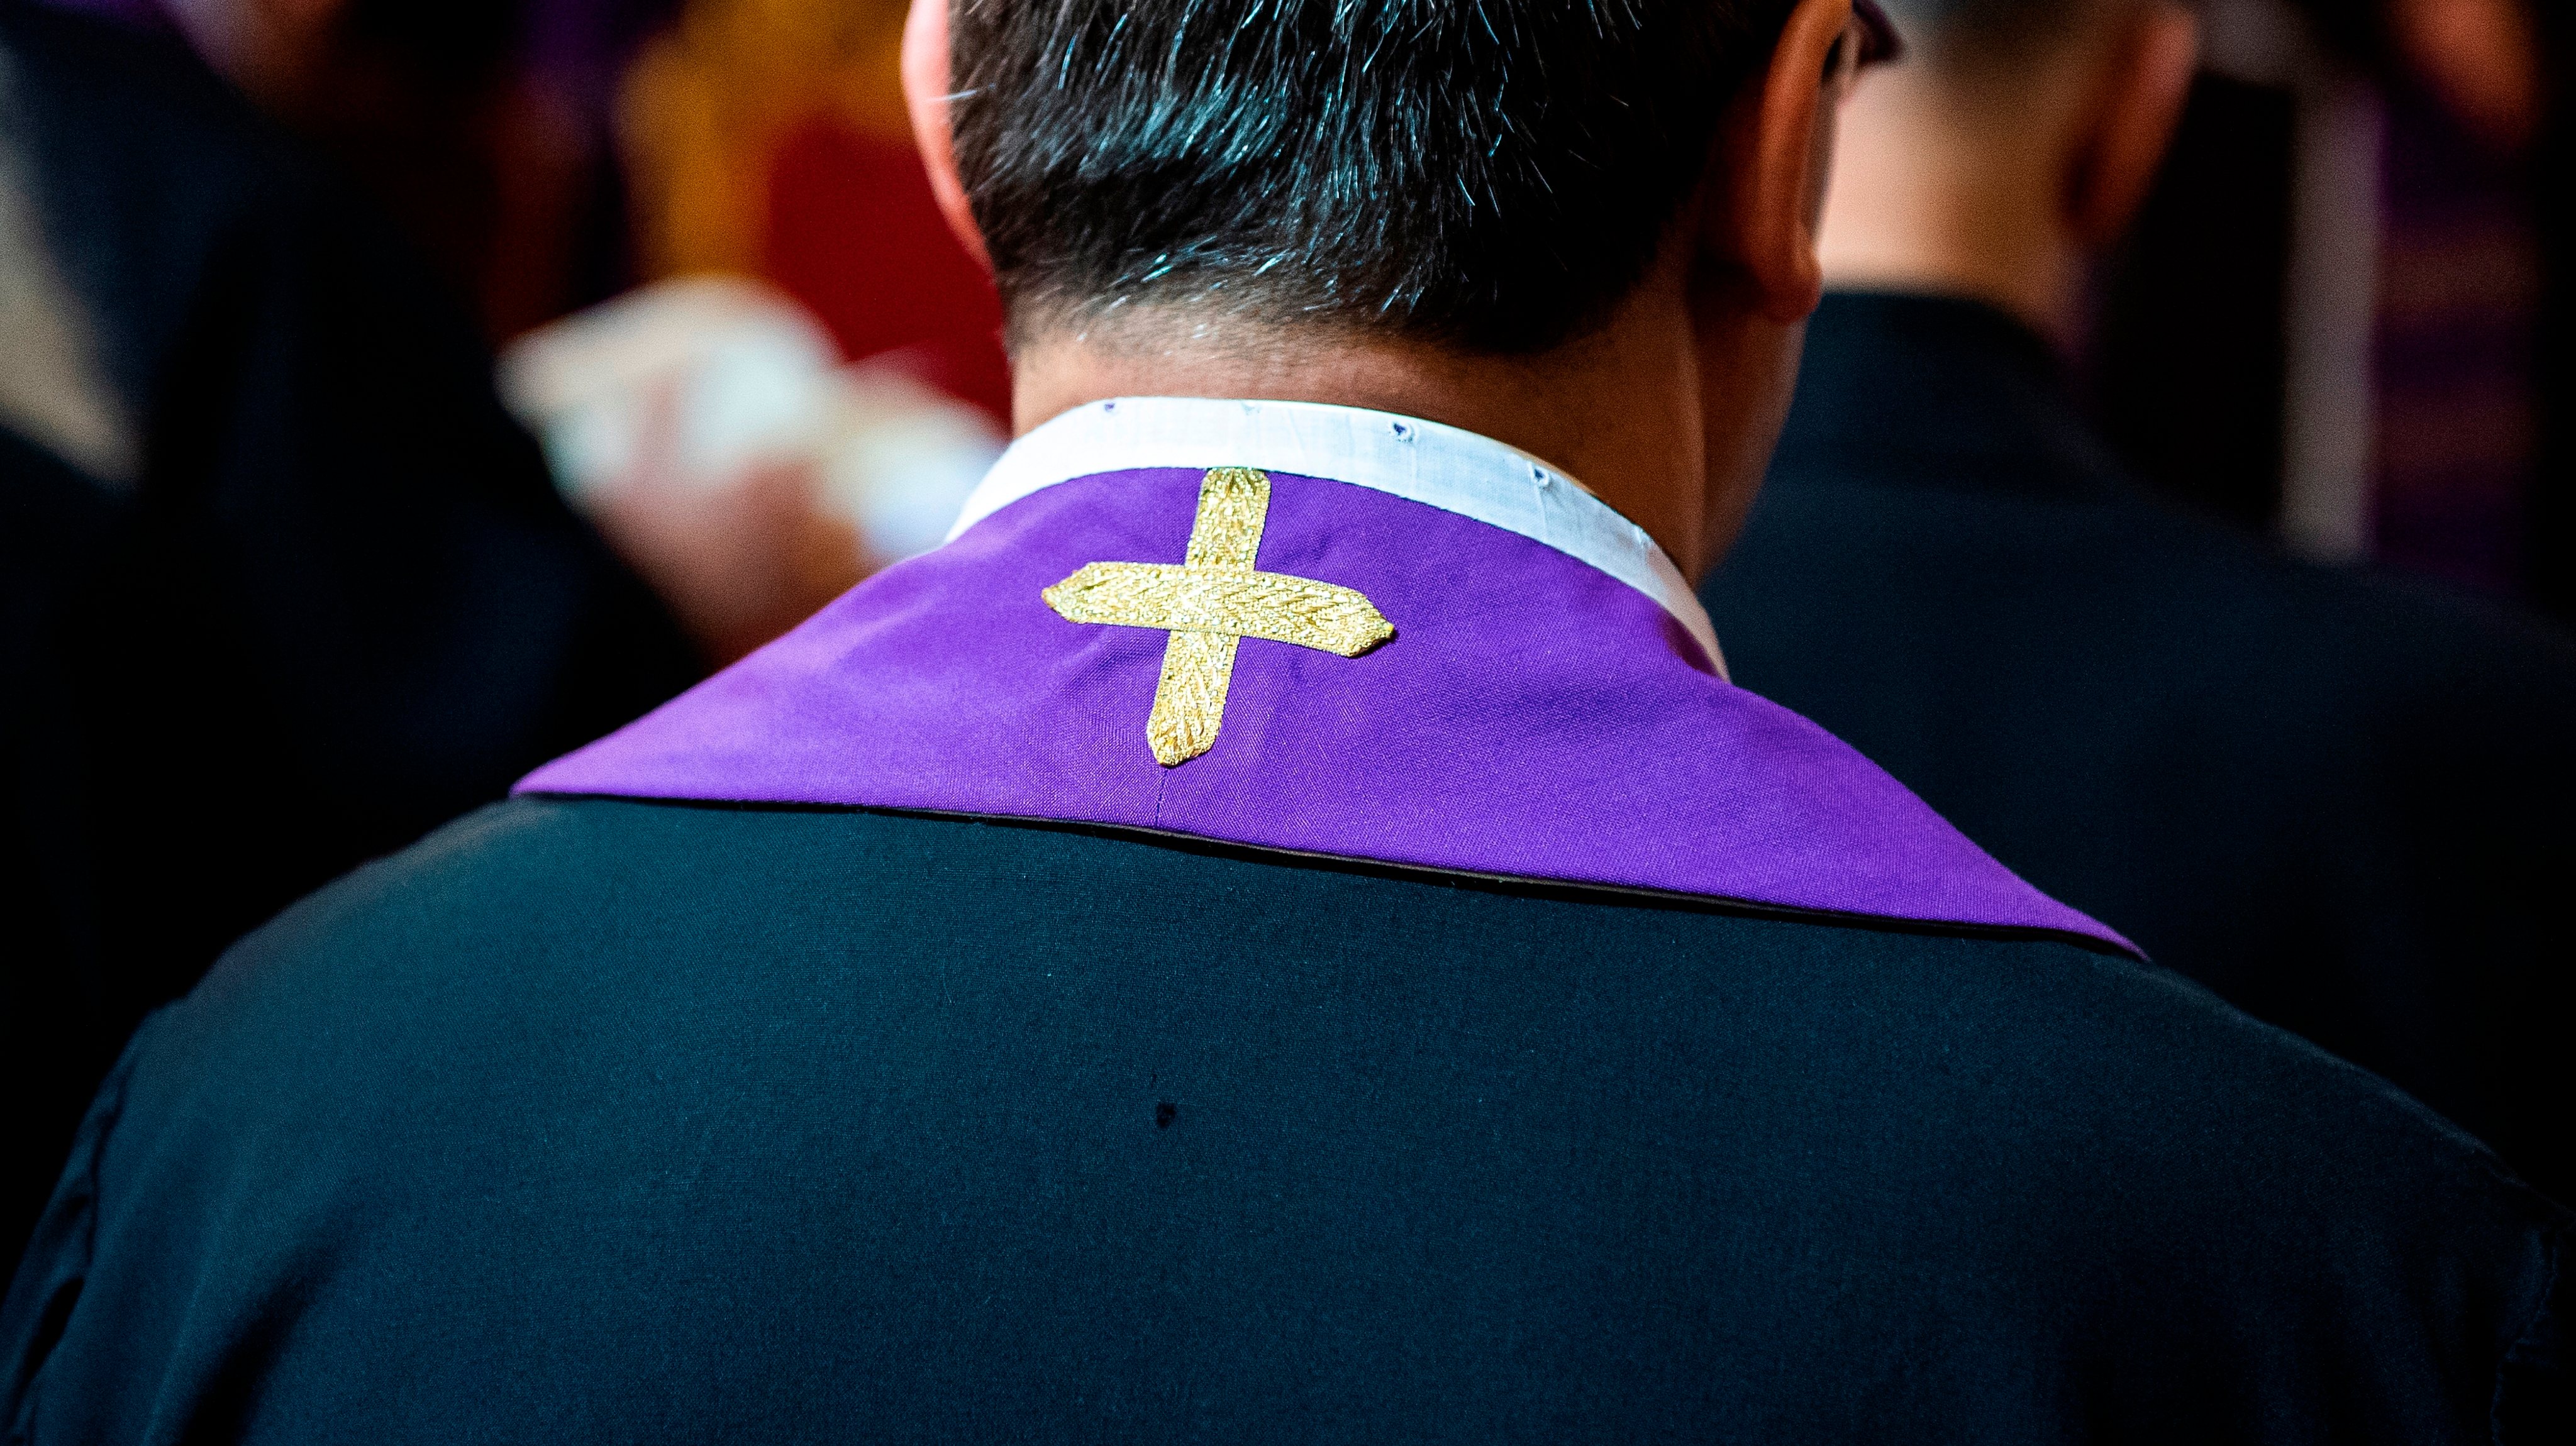 Priest wearing a purple stole in Rome, Italy.